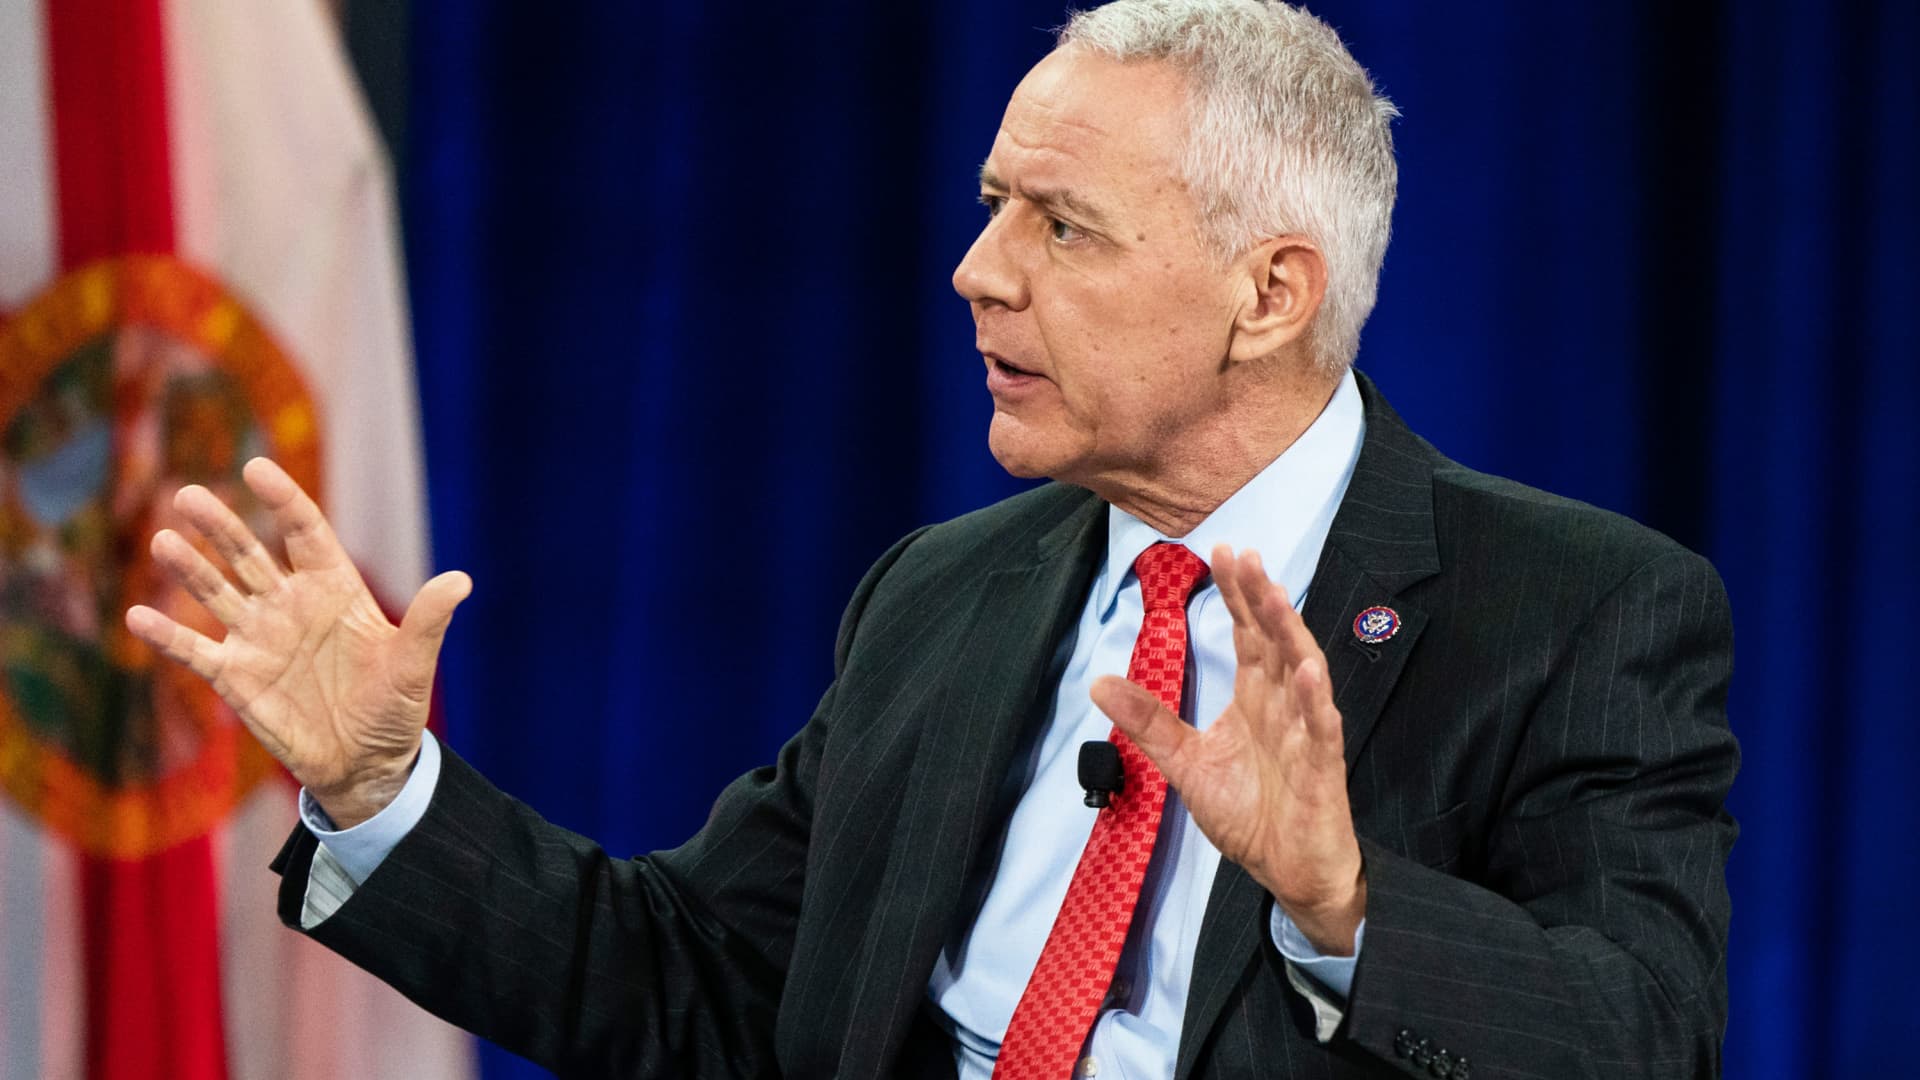 Representative Ken Buck, a Republican from Colorado, speaks during a panel discussion at the Conservative Political Action Conference (CPAC) in Orlando, Florida, on Saturday, Feb. 27, 2021.